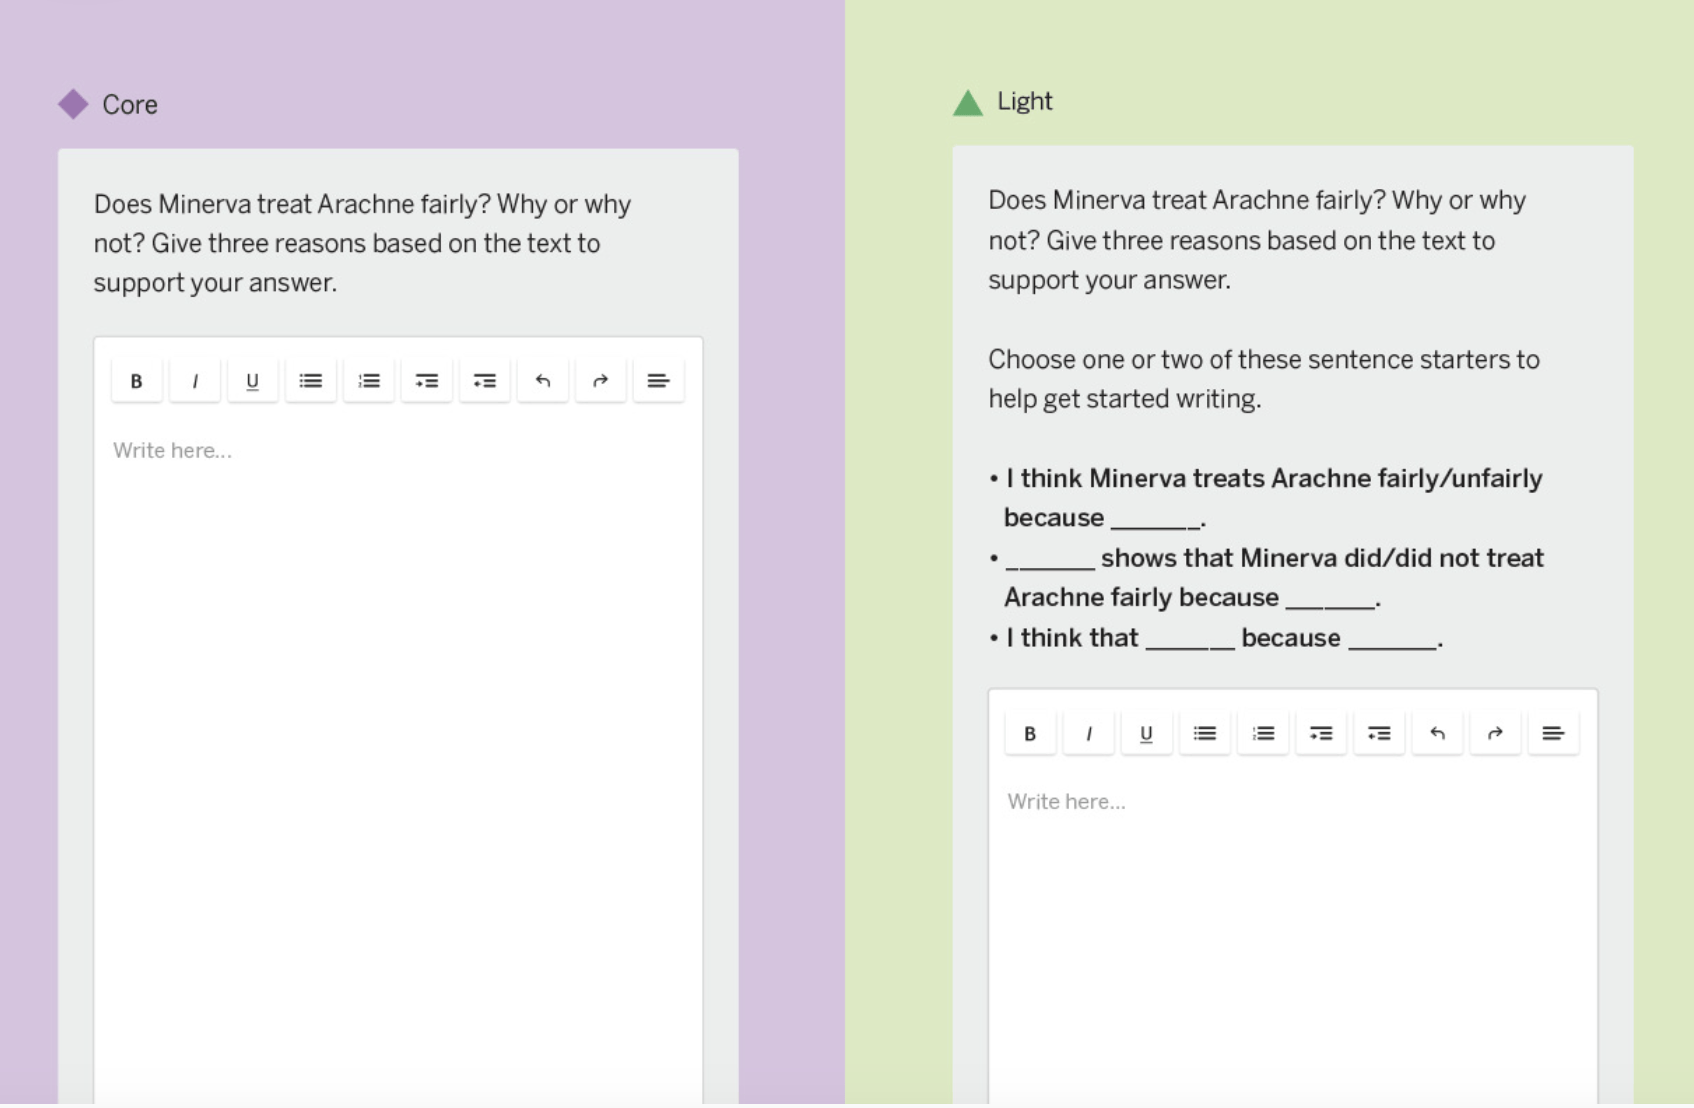 Two split-screen images of a digital learning interface, one in purple and one in green, each featuring a question about minerva and arachne with text input fields for answers.